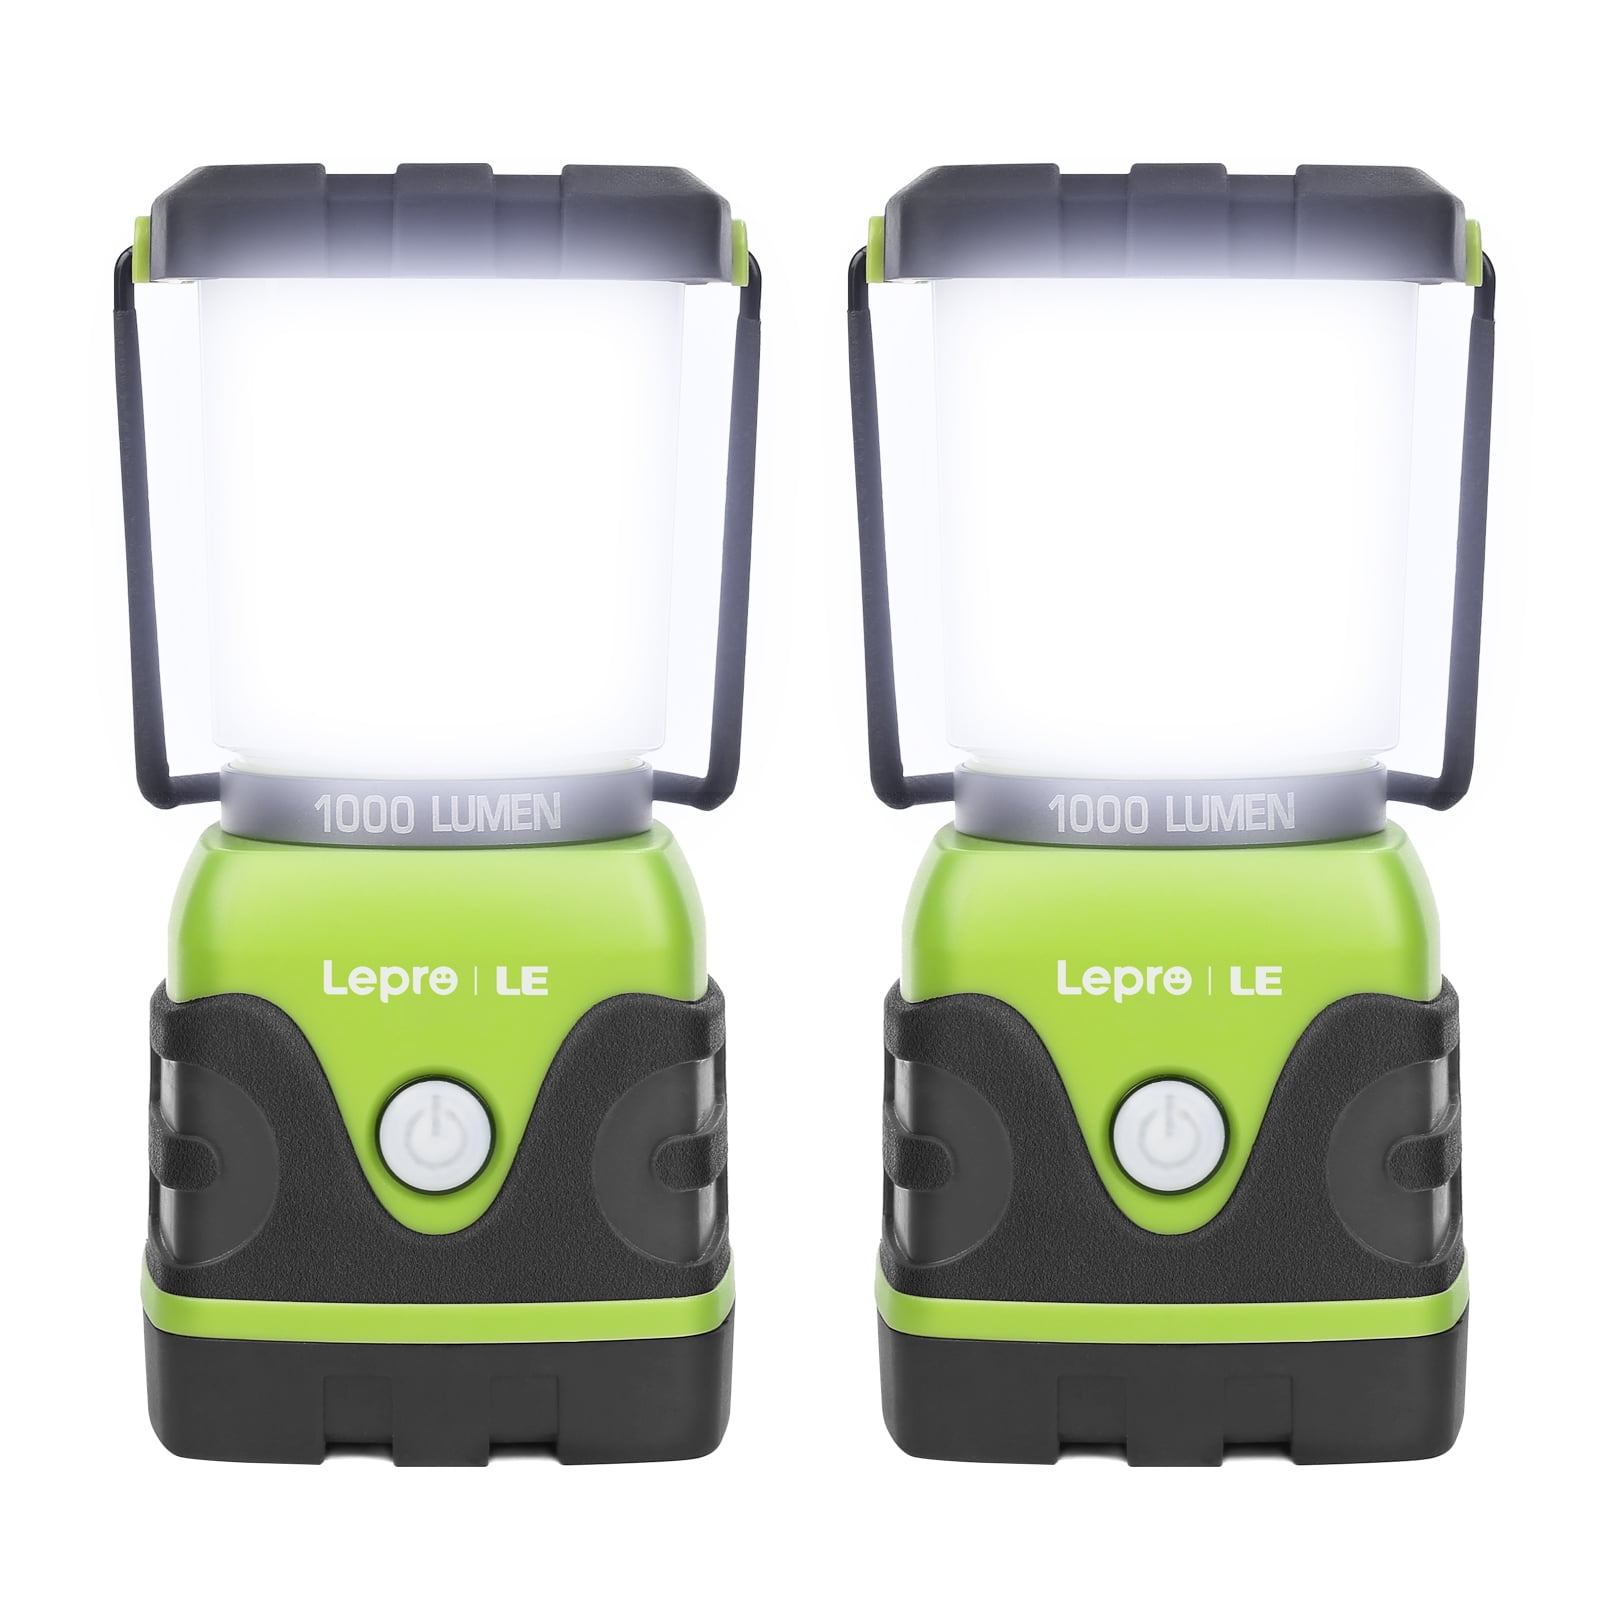 LED Camping Lantern Rechargeable, Wsky 1800LM Lanterns for Power Outages, 6  Modes 4400mHA Perfect Flashlight for Hurricane, Emergency Light, Storm,  Survival Kits, Hiking, Fishing, Tent, Home 1 Pack